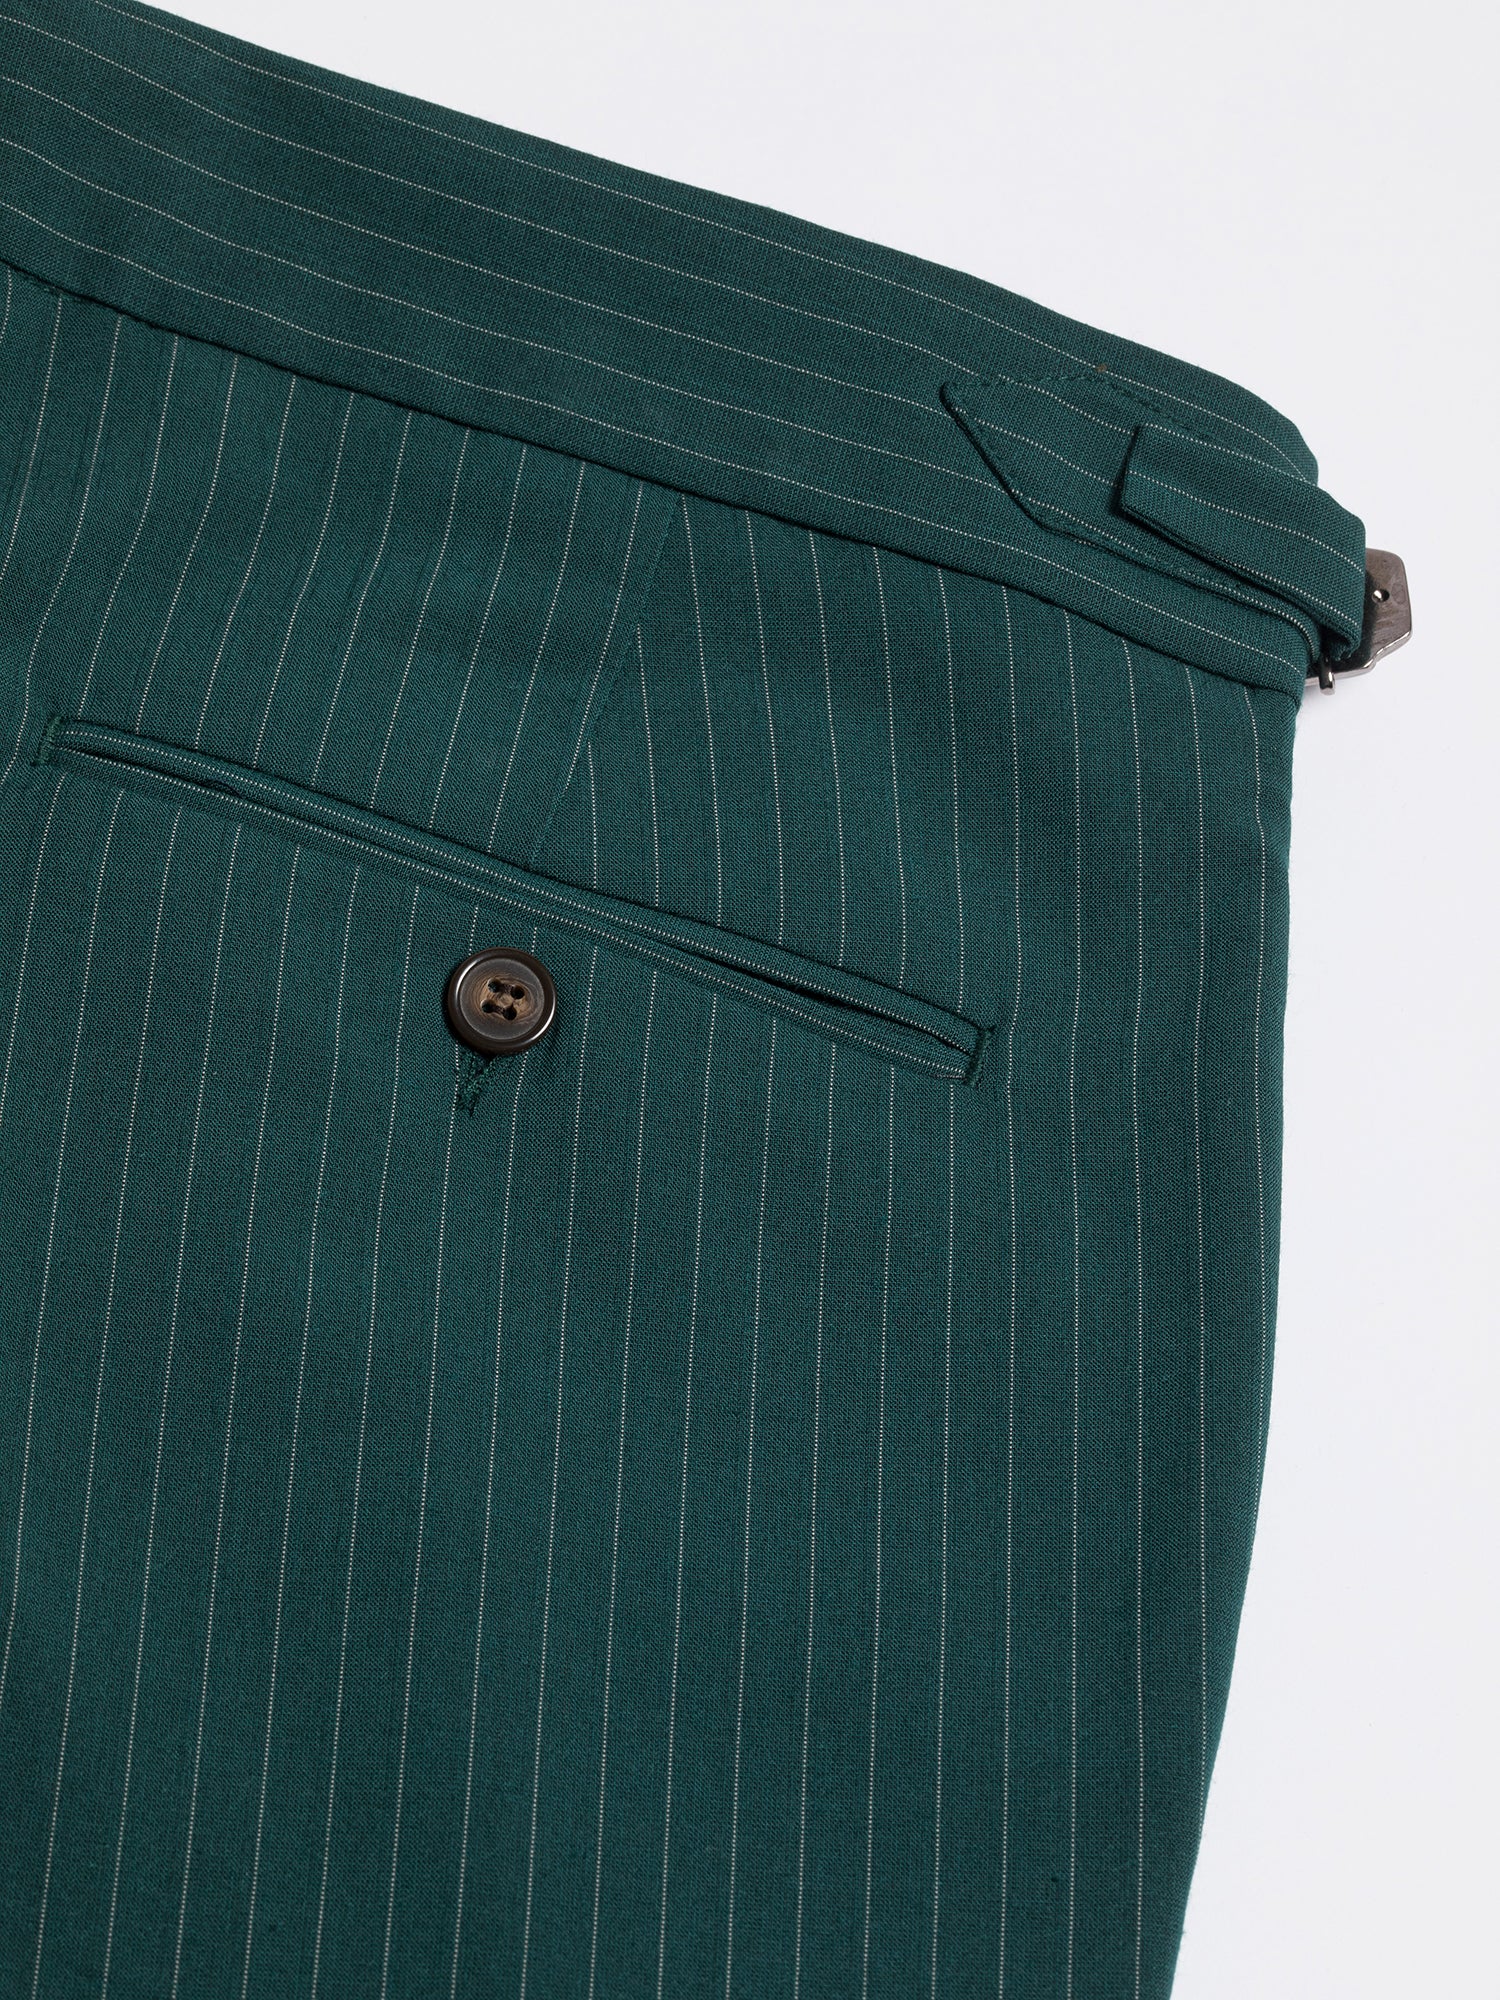 Green Striped Modern-Fit Suit 3-Piece